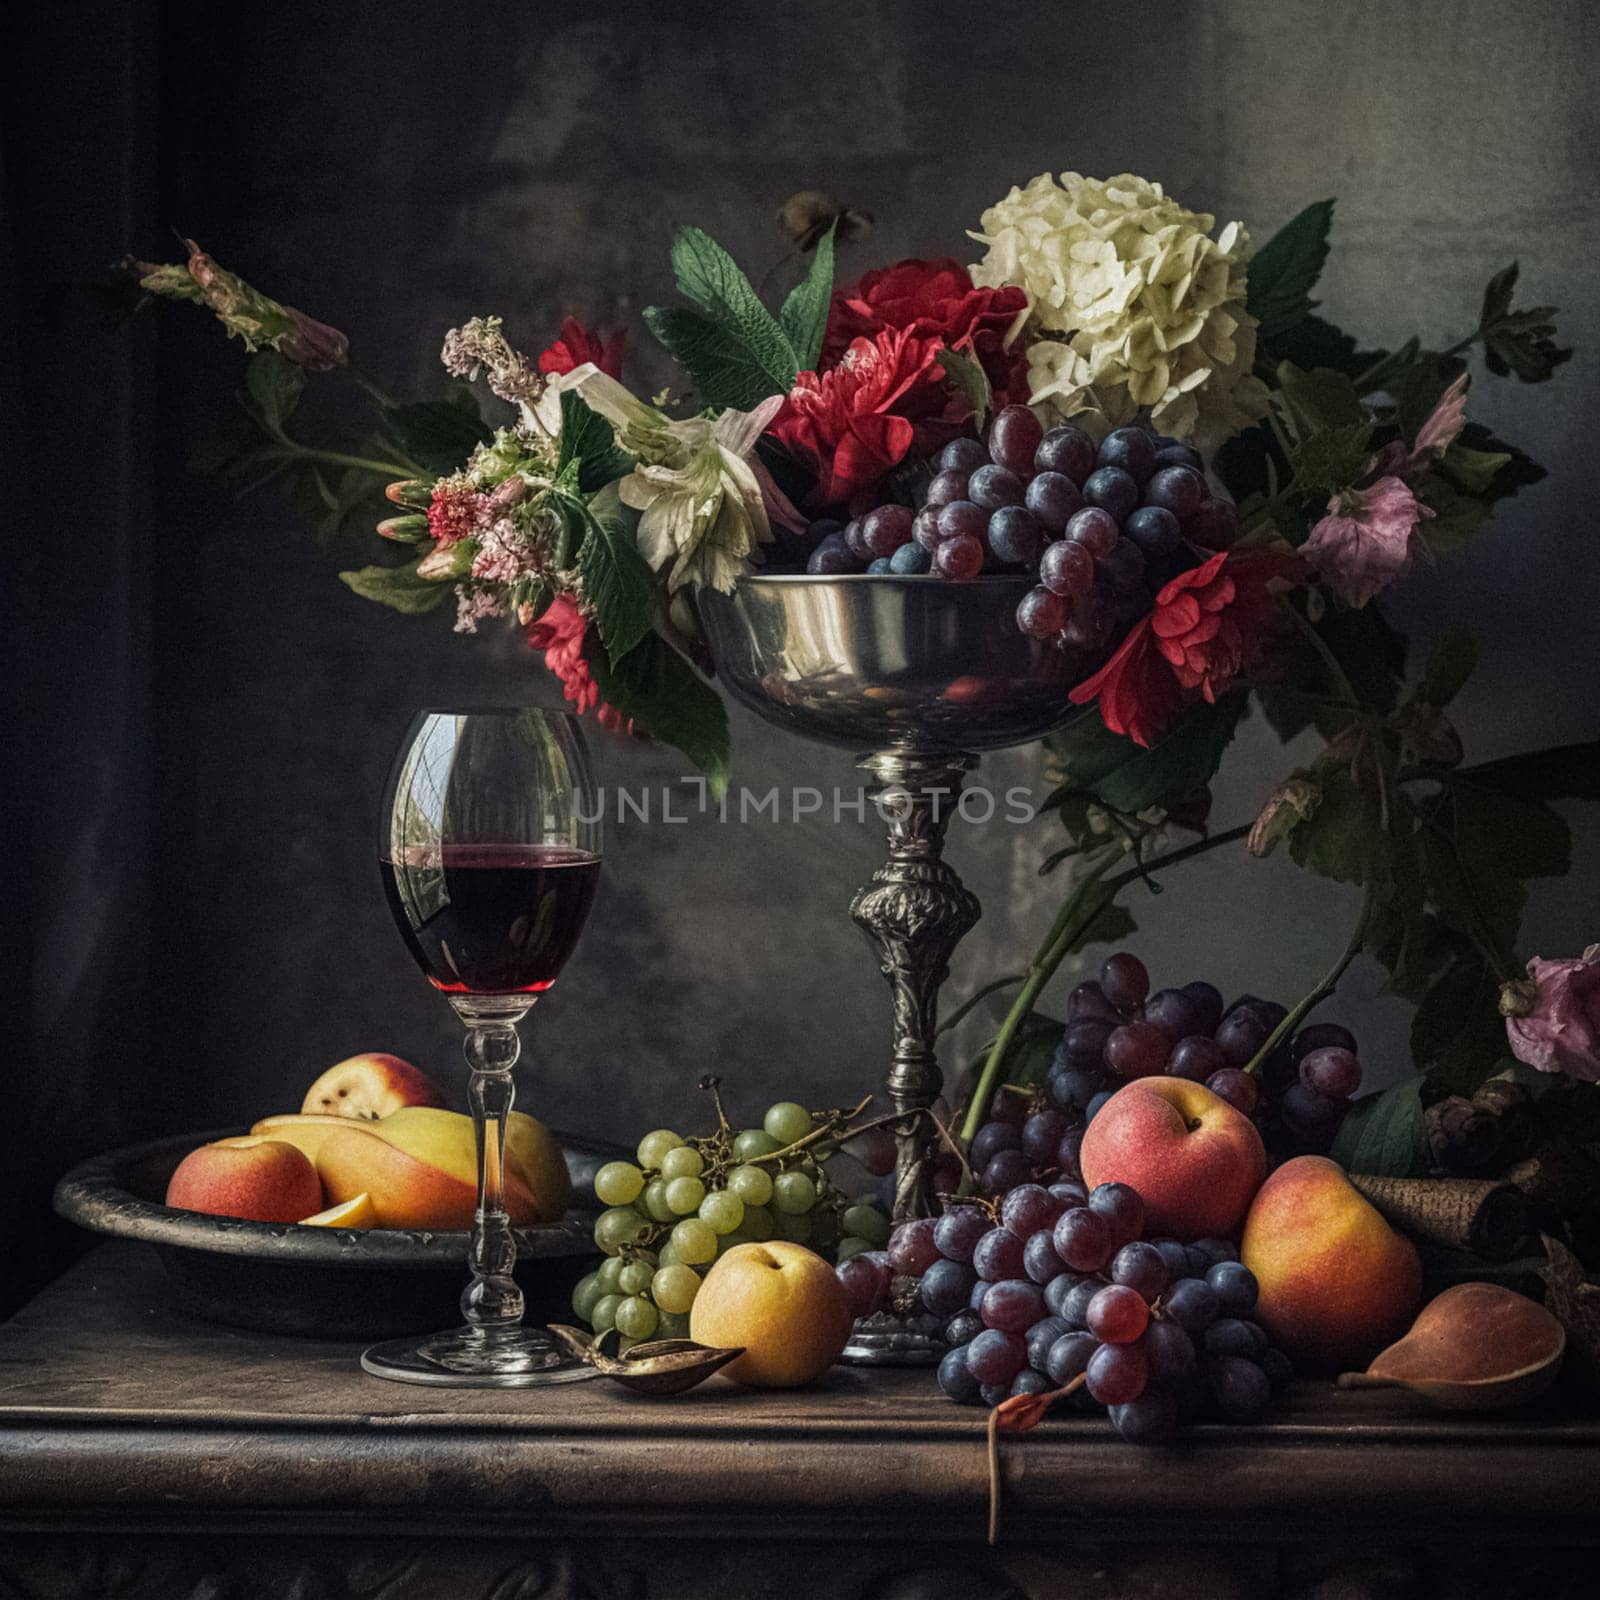 Classic still life composition with a rich arrangement of flowers and fresh fruits and a glass of wine, accented by lush, vintage floral elements